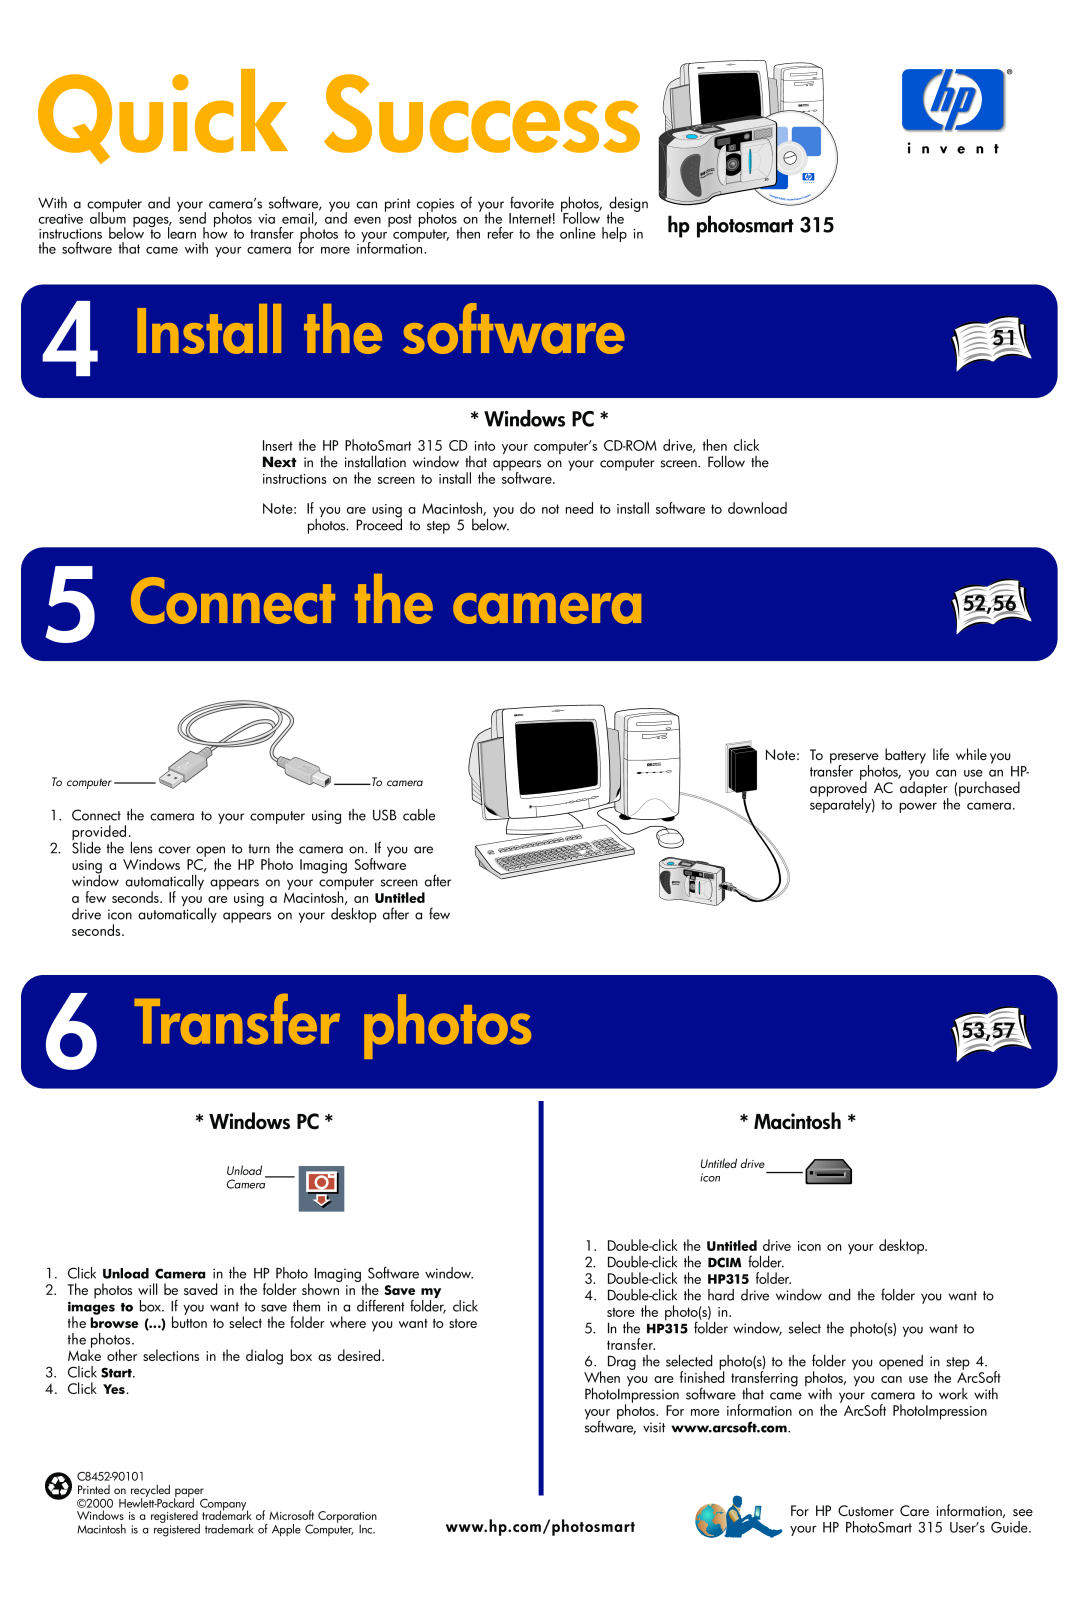 HP 315 manual Install the software, Connect the camera, Windows PC, 52,56, 53,57, Quick Success, Transfer photos 